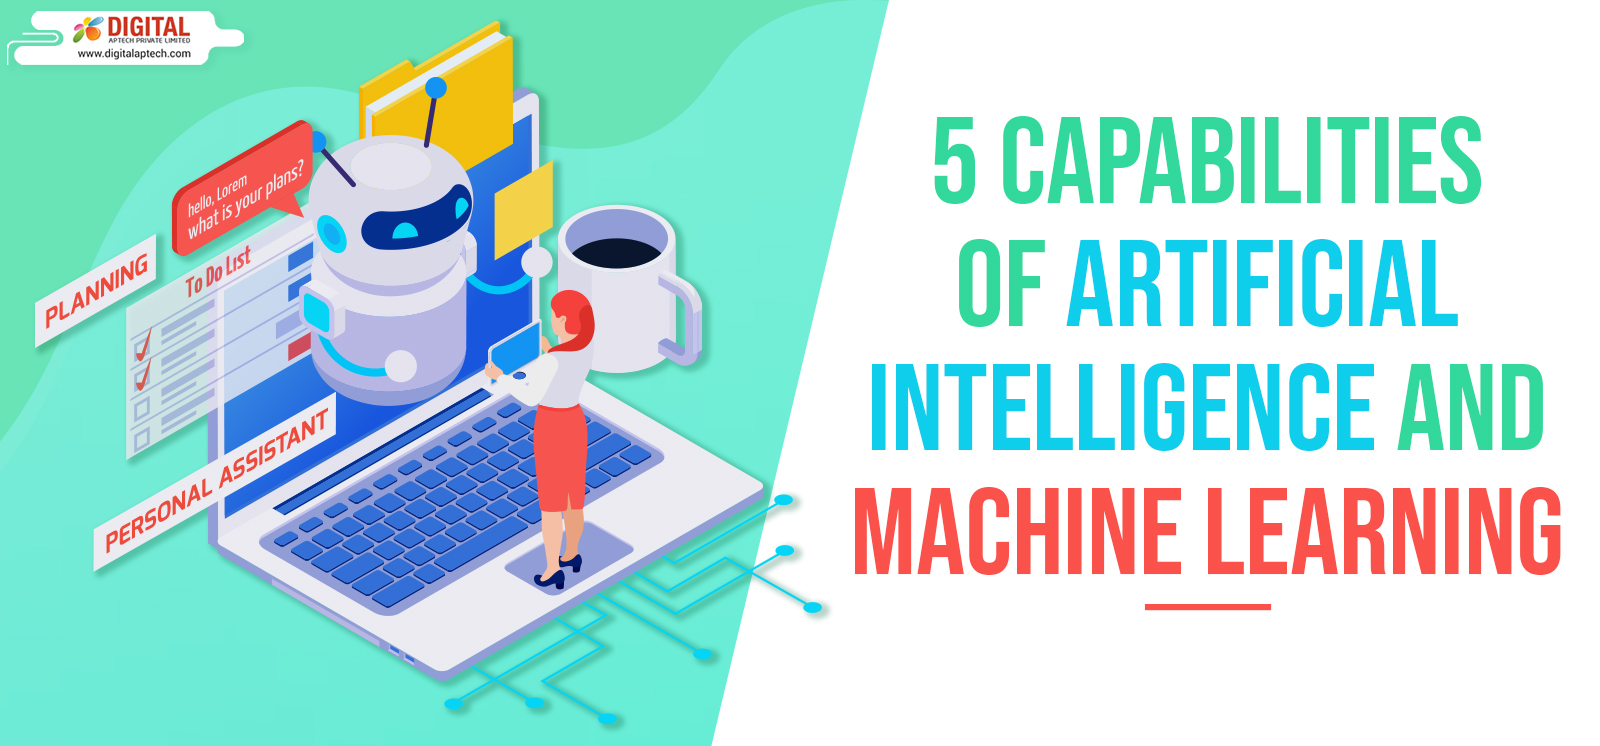 5 Capabilities of Artificial Intelligence and Machine Learning